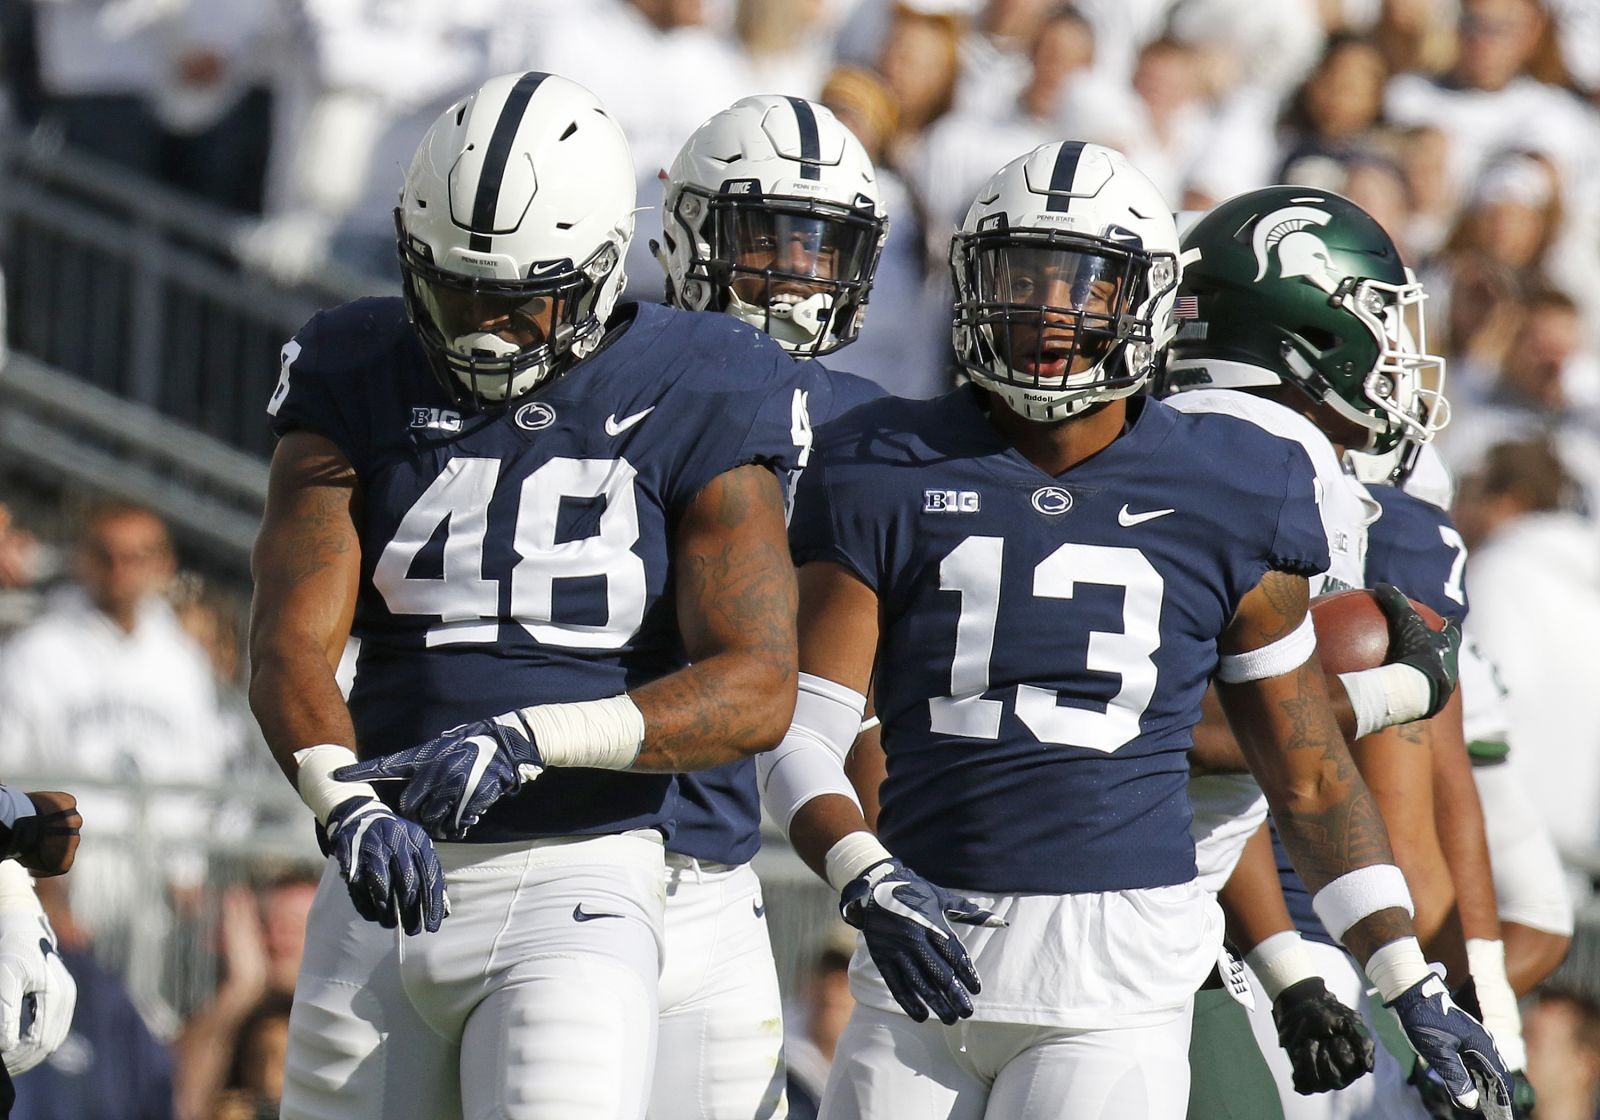 Penn State football How many Top25 teams are on schedule for 2019?